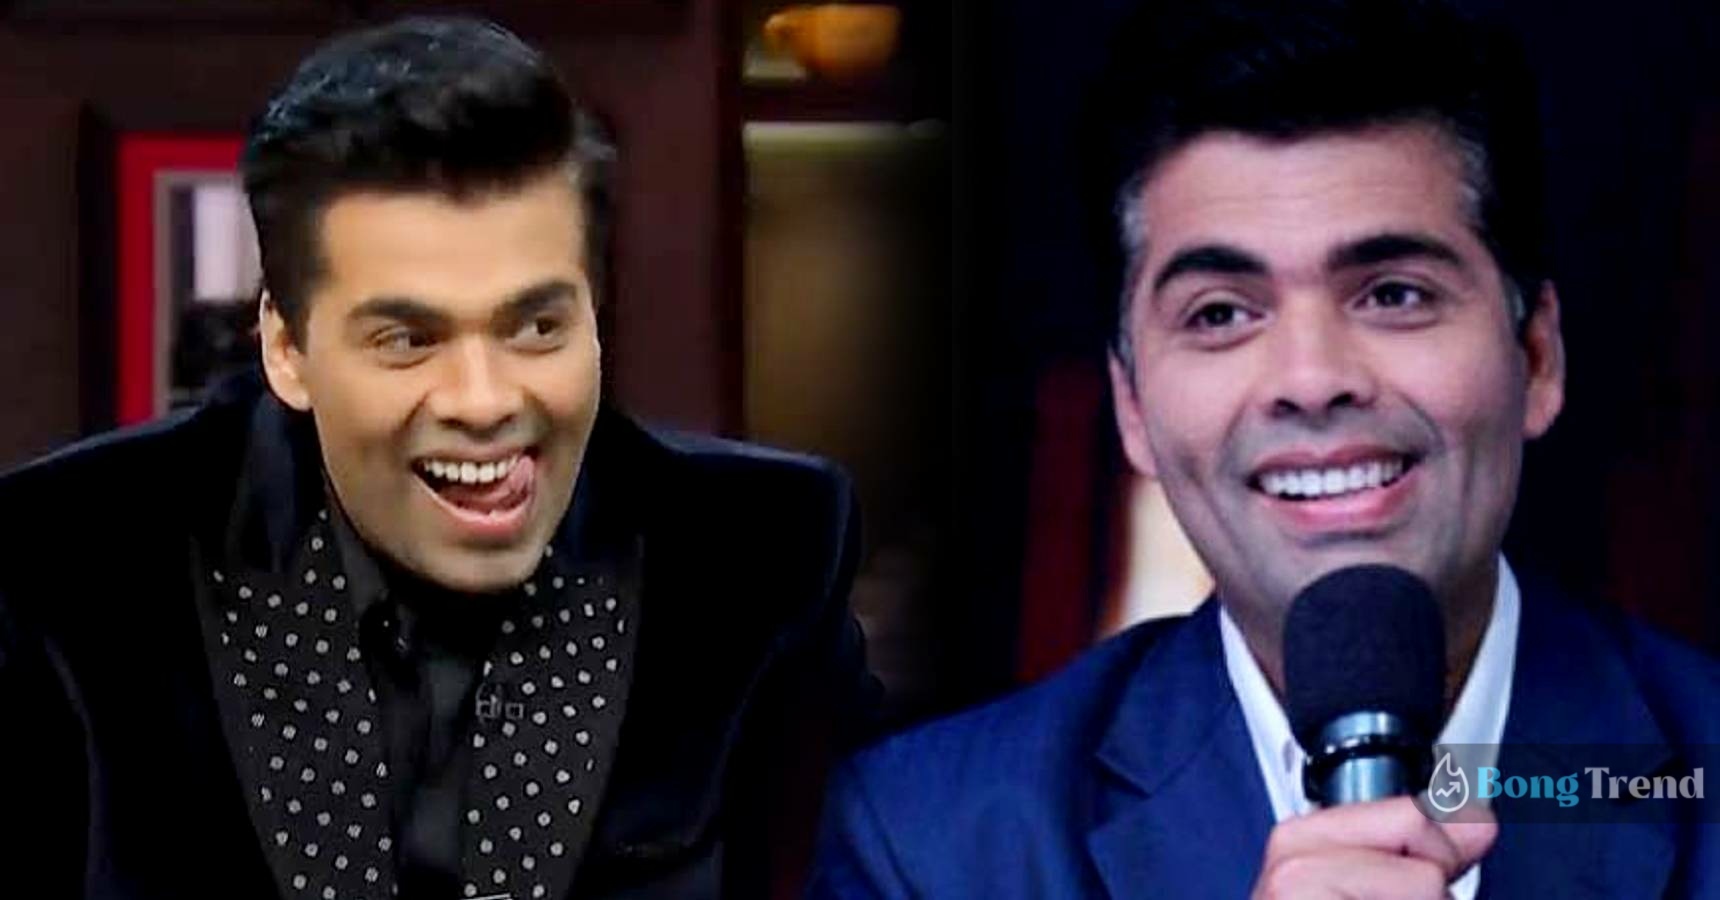 Karan Johar revealed he tried to make out with his partner in a bathroom of a plane